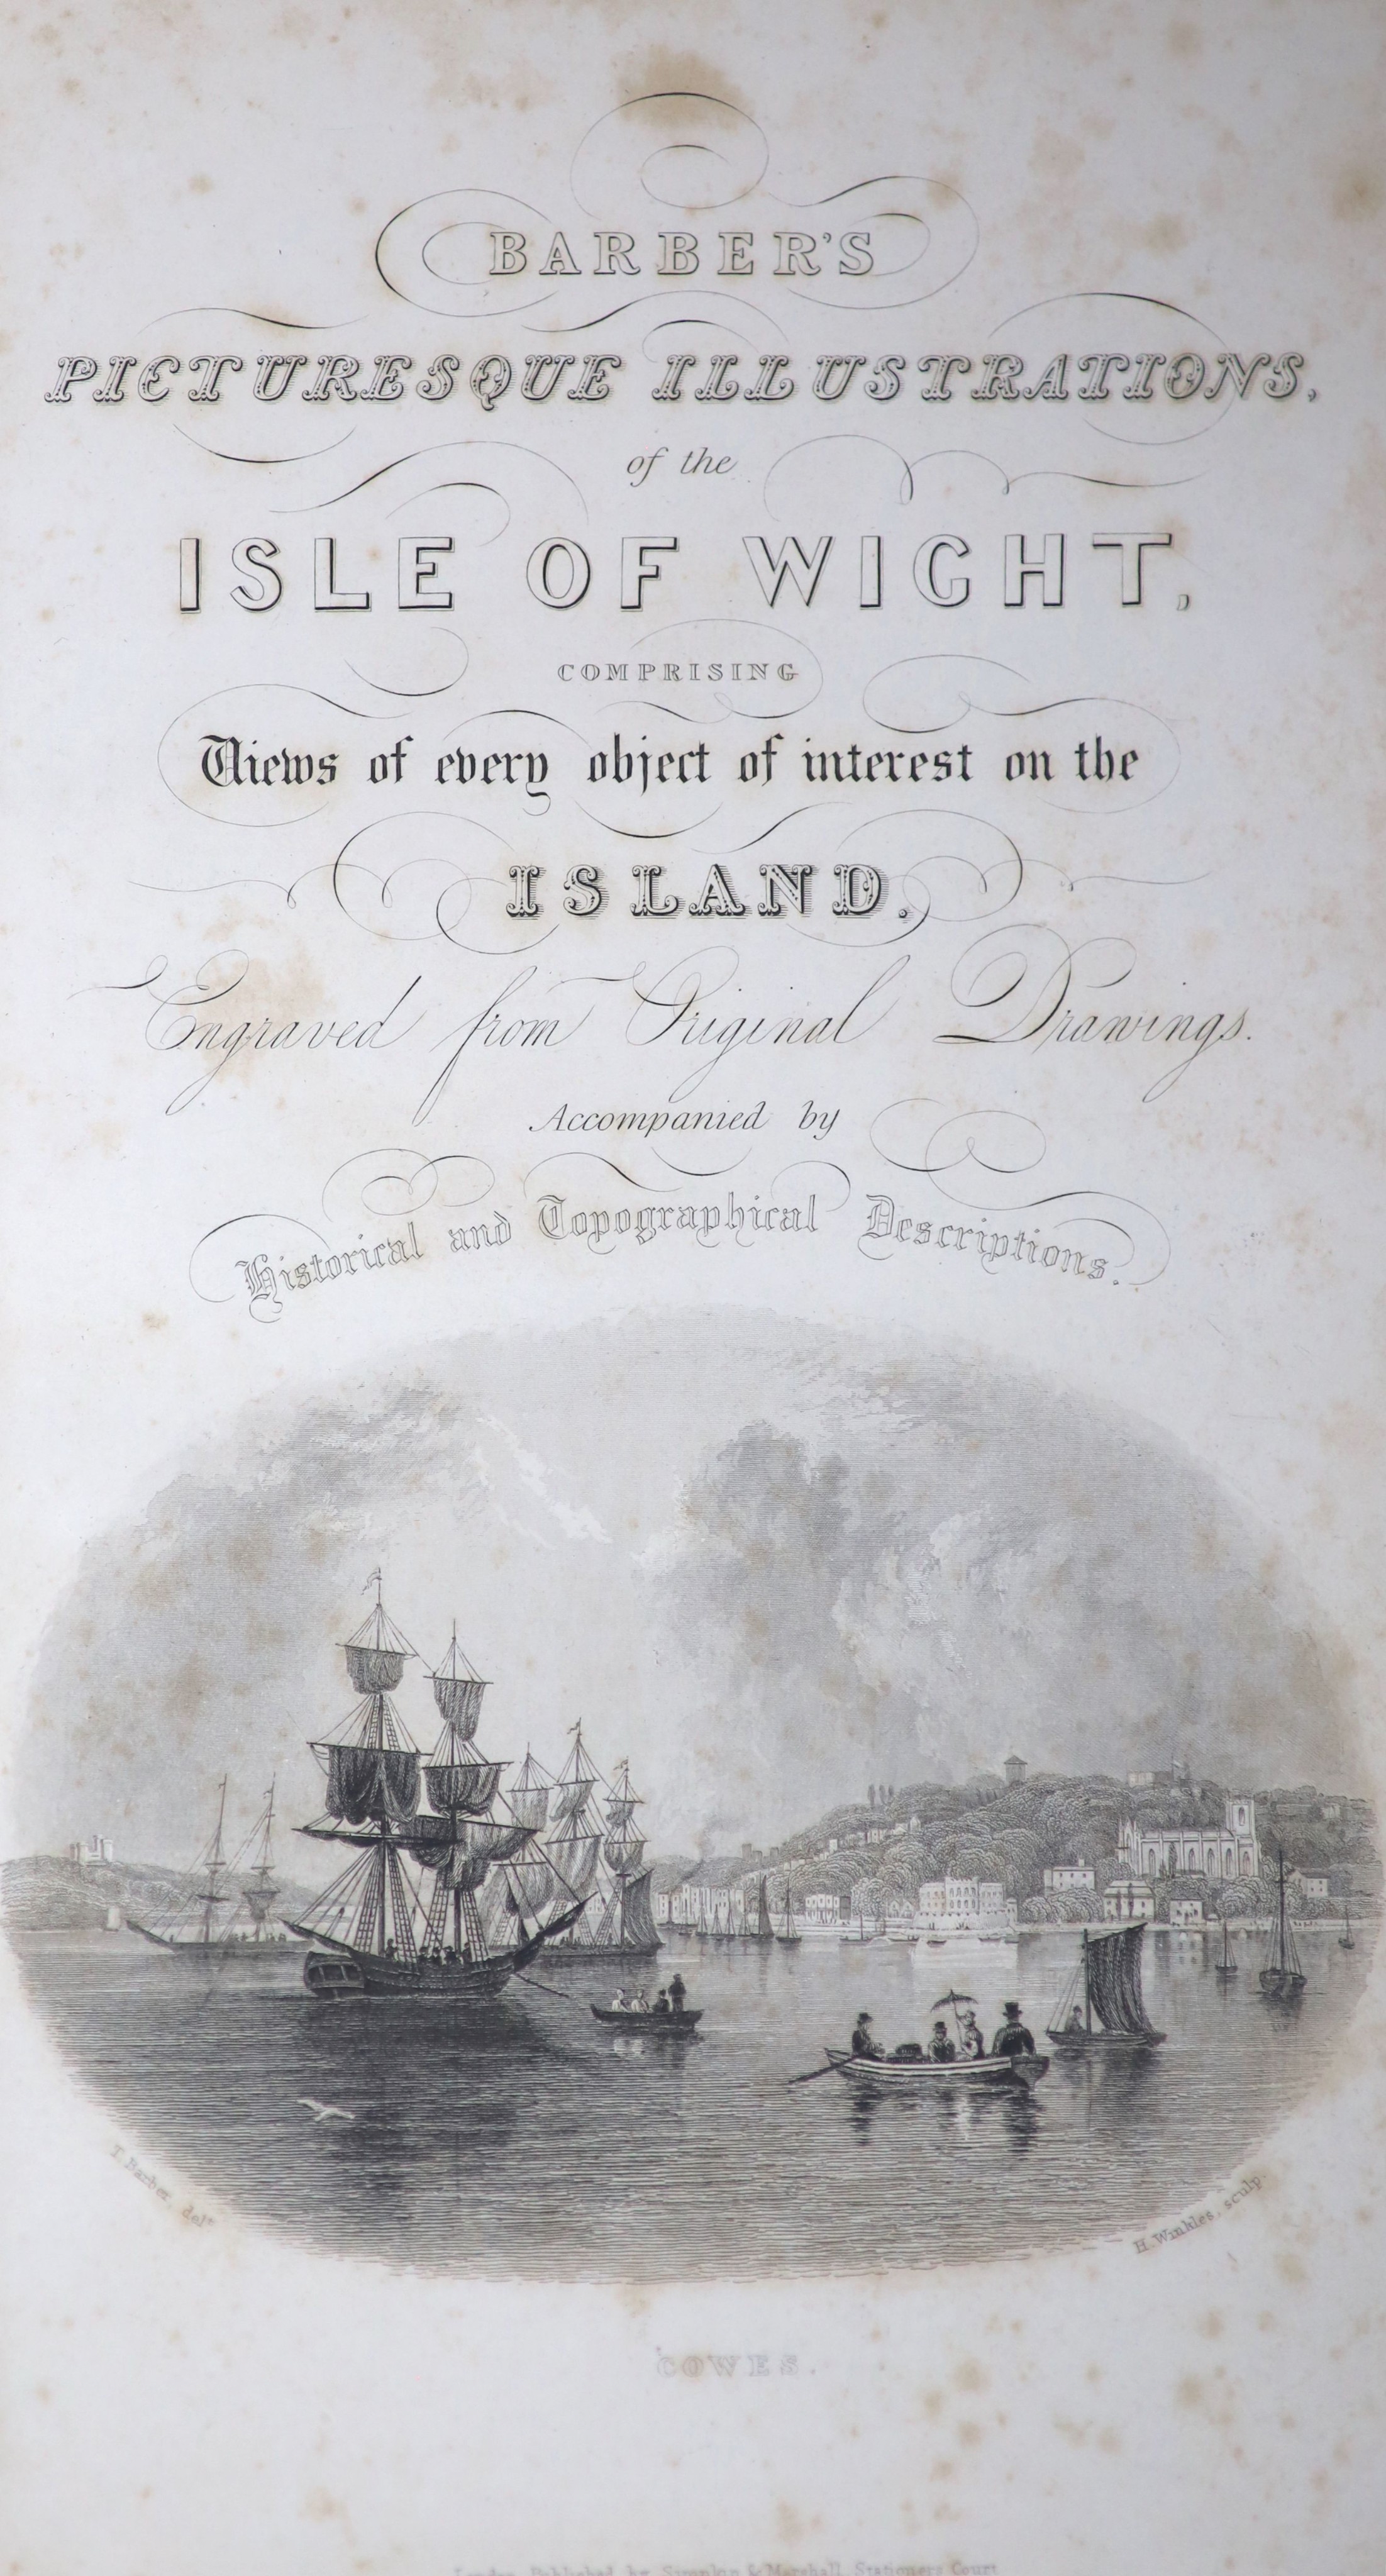 Barber, Thomas - Picturesque Illustrations of the Isle of Wight, original cloth with gilt vignette, engraved title (foxed), folding map and 40 plates, Sikkim and Marshall, London, [1834]